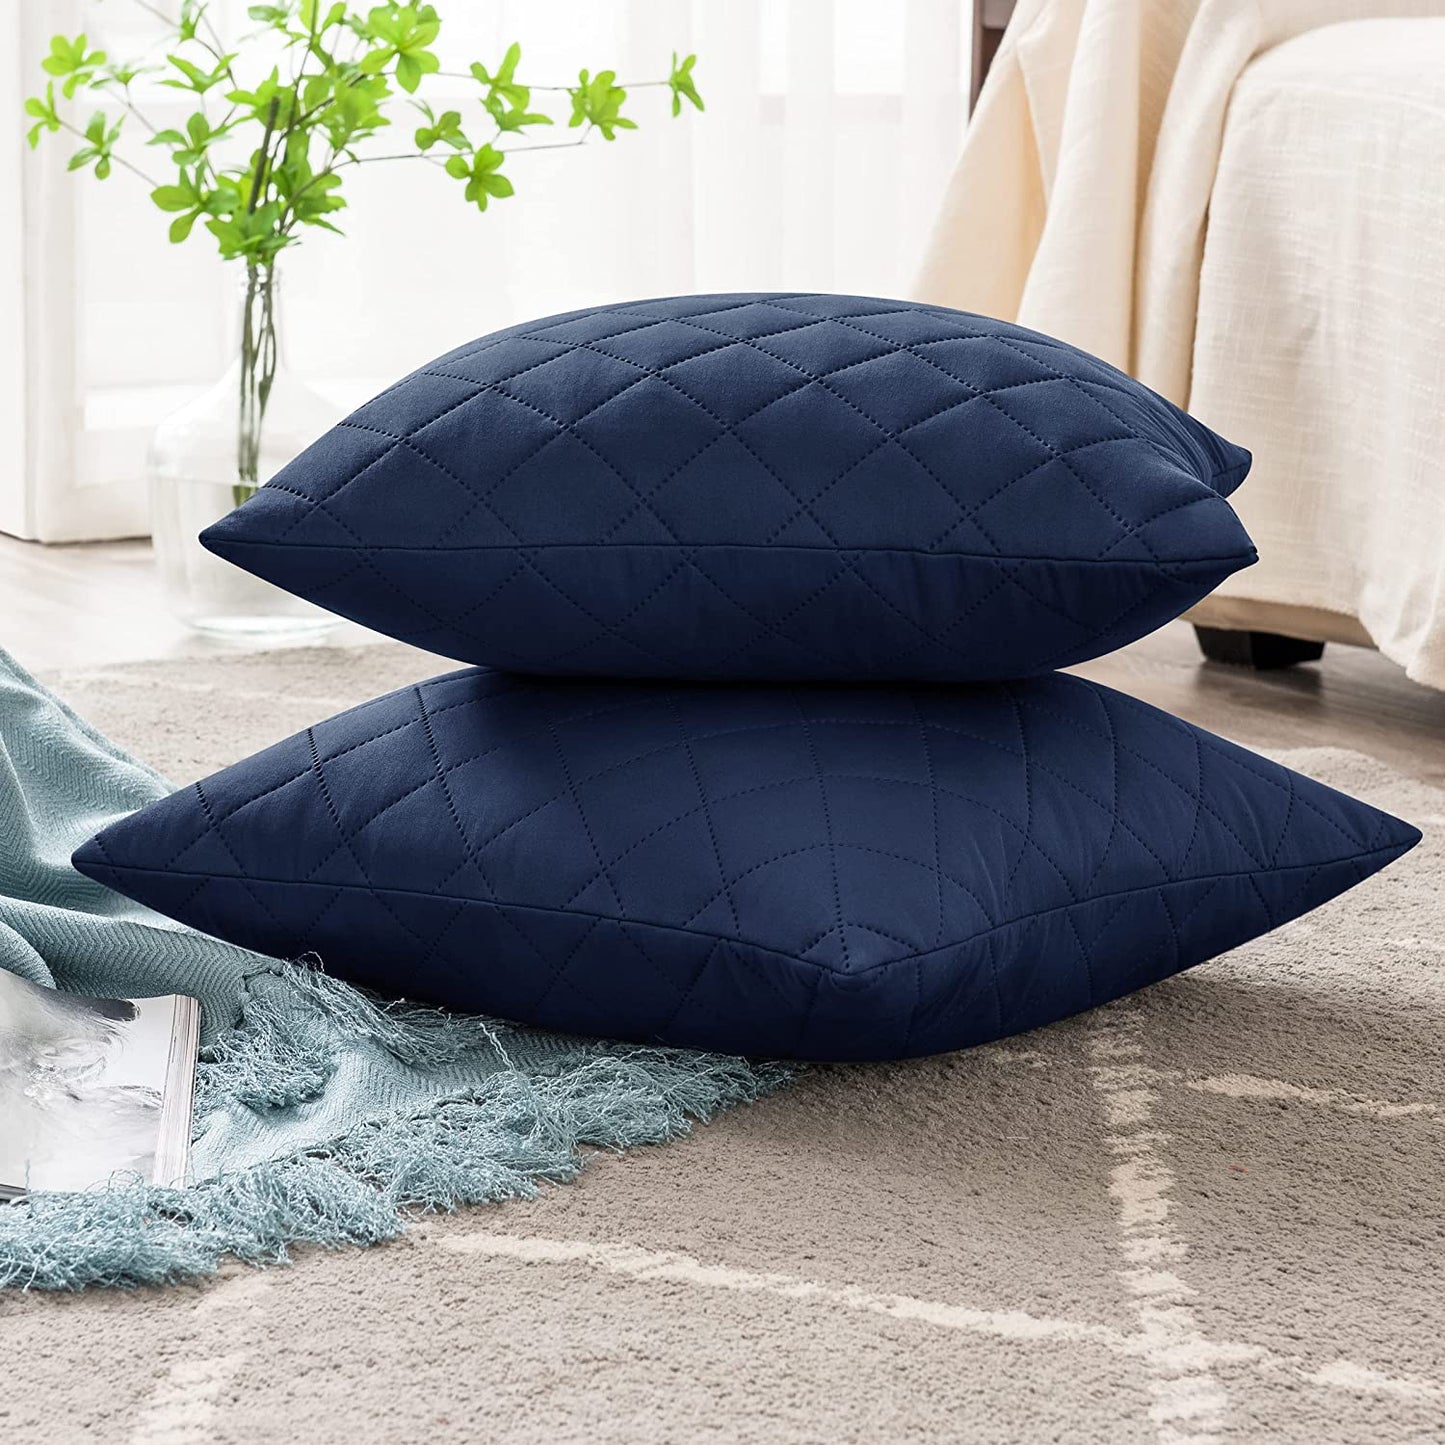 QUILTED CUSHION COVER SQUARE PATTERN 16 X 16 INCHES - NAVY BLUE